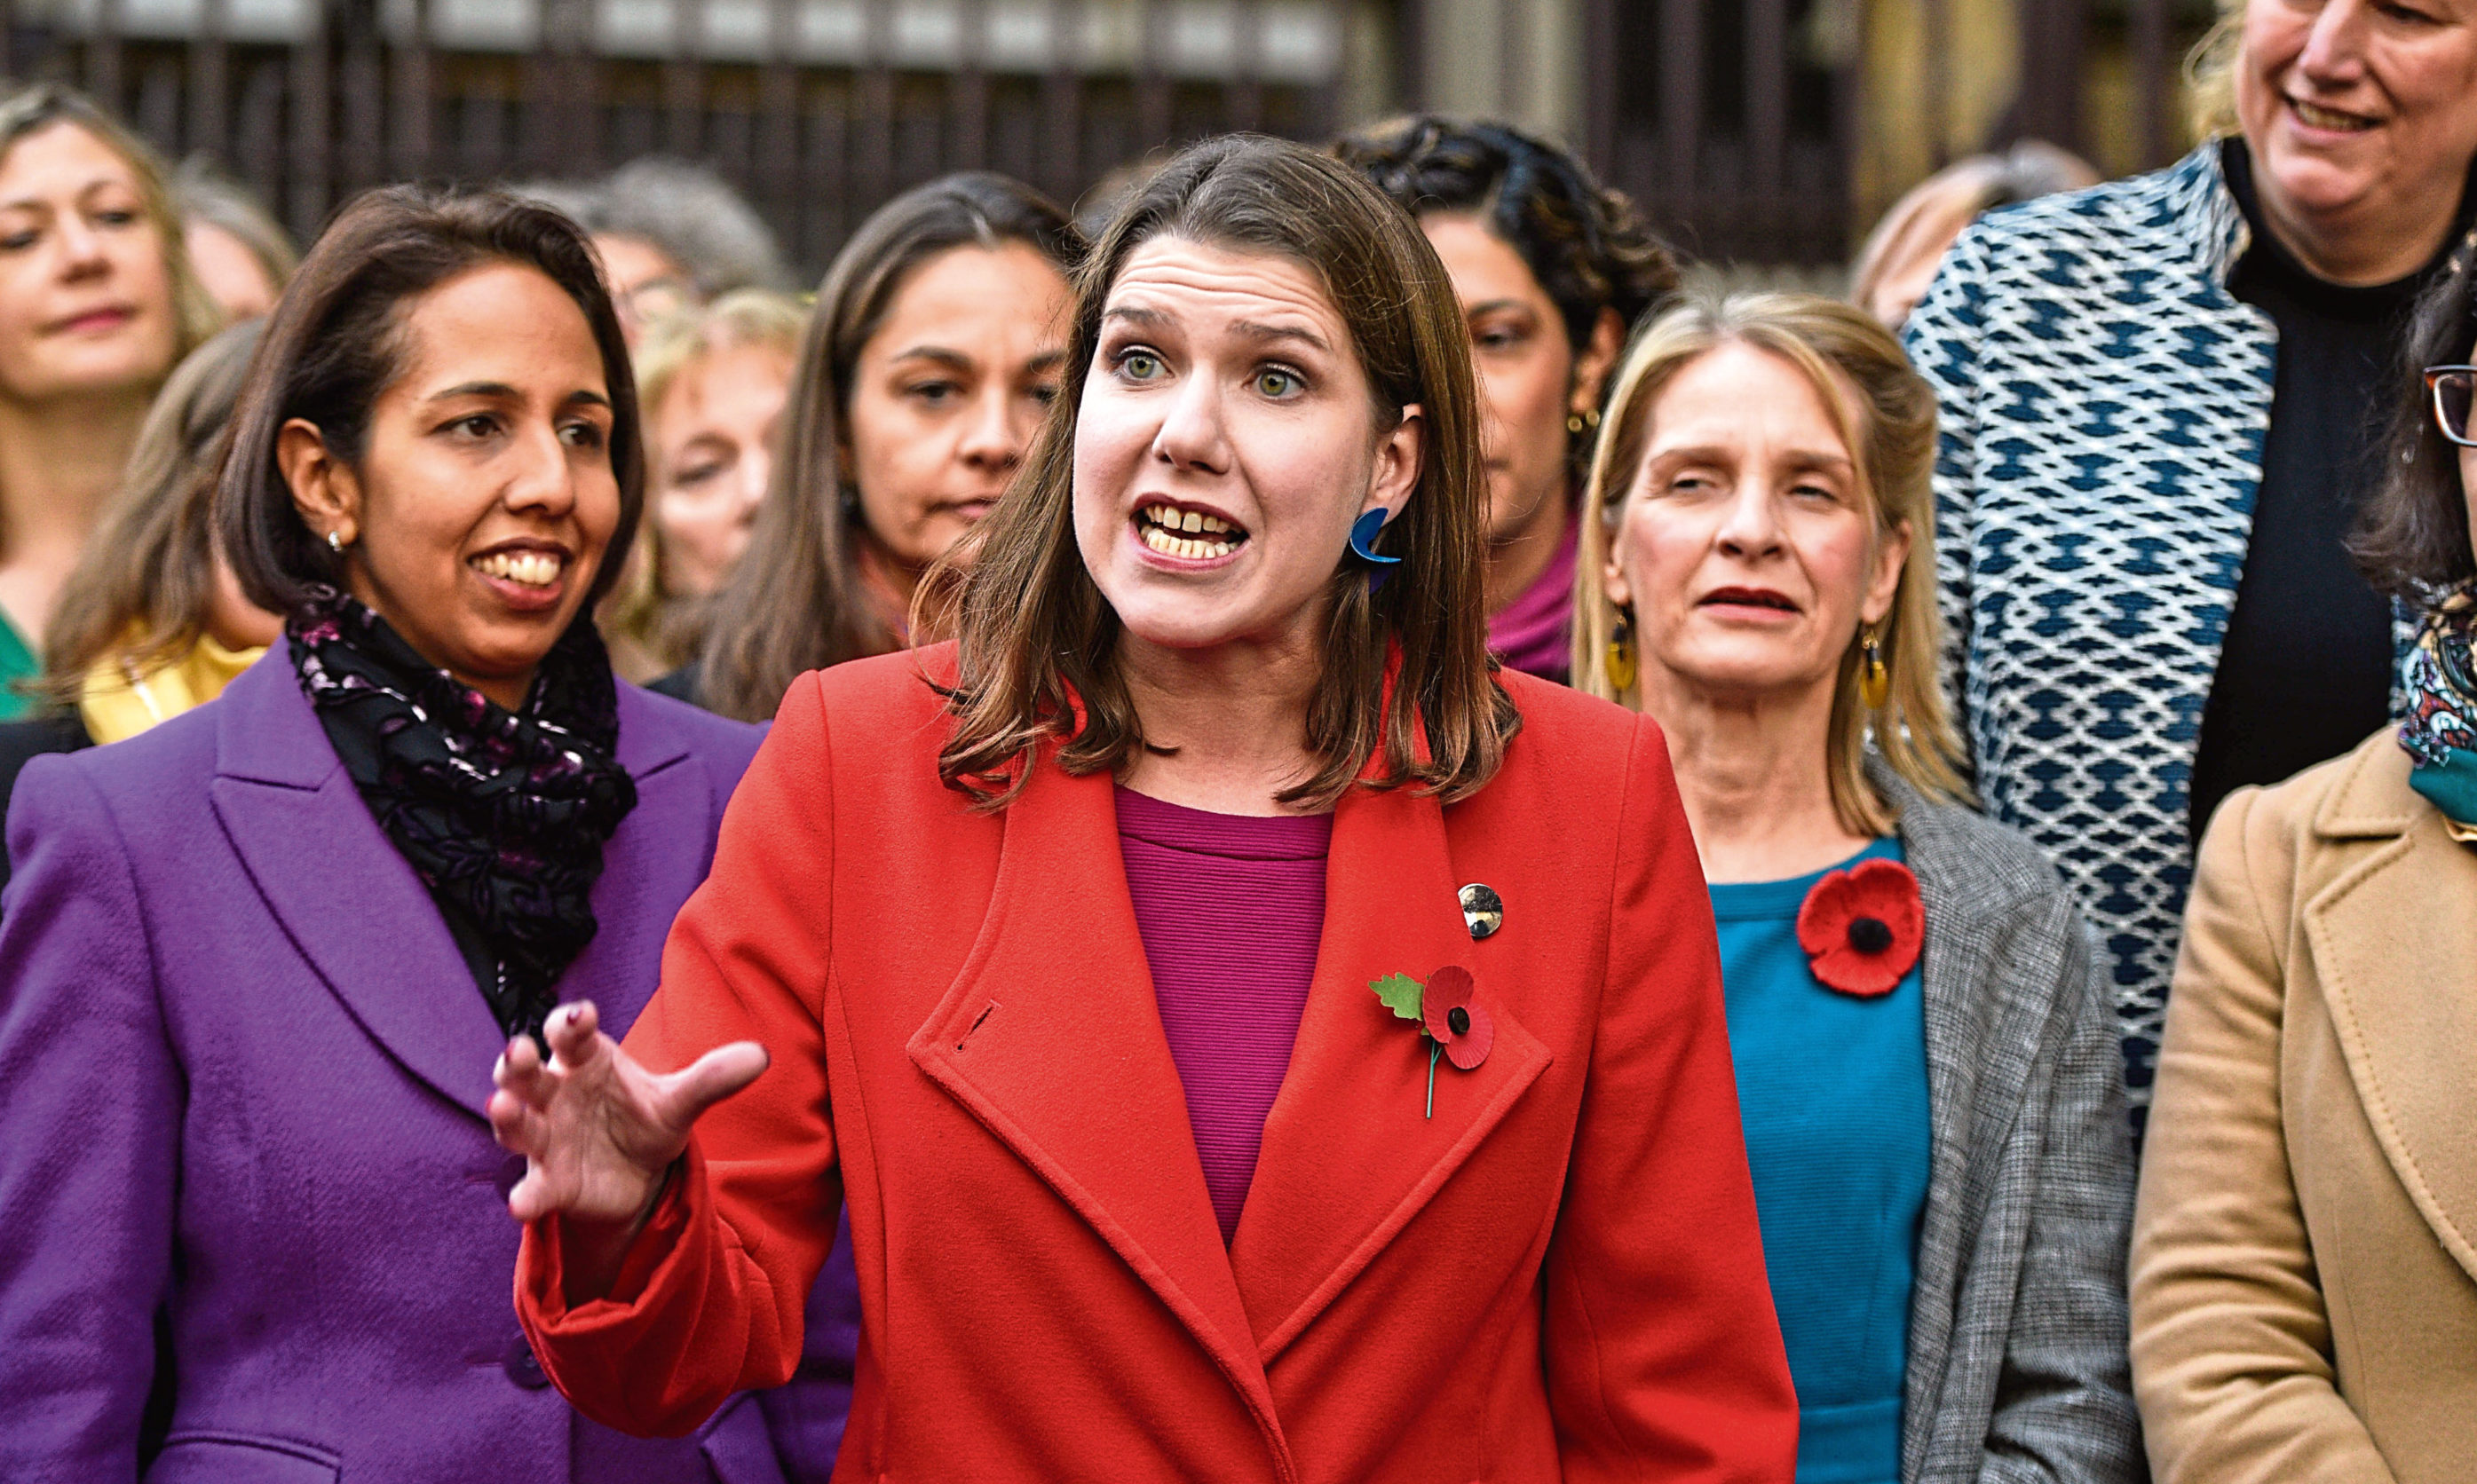 Liberal Democrat Leader Jo Swinson gives a statement saying she must be allowed to take part in TV election debates and will pursue legal avenues if her party are not included on November 4, 2019 in London, England.